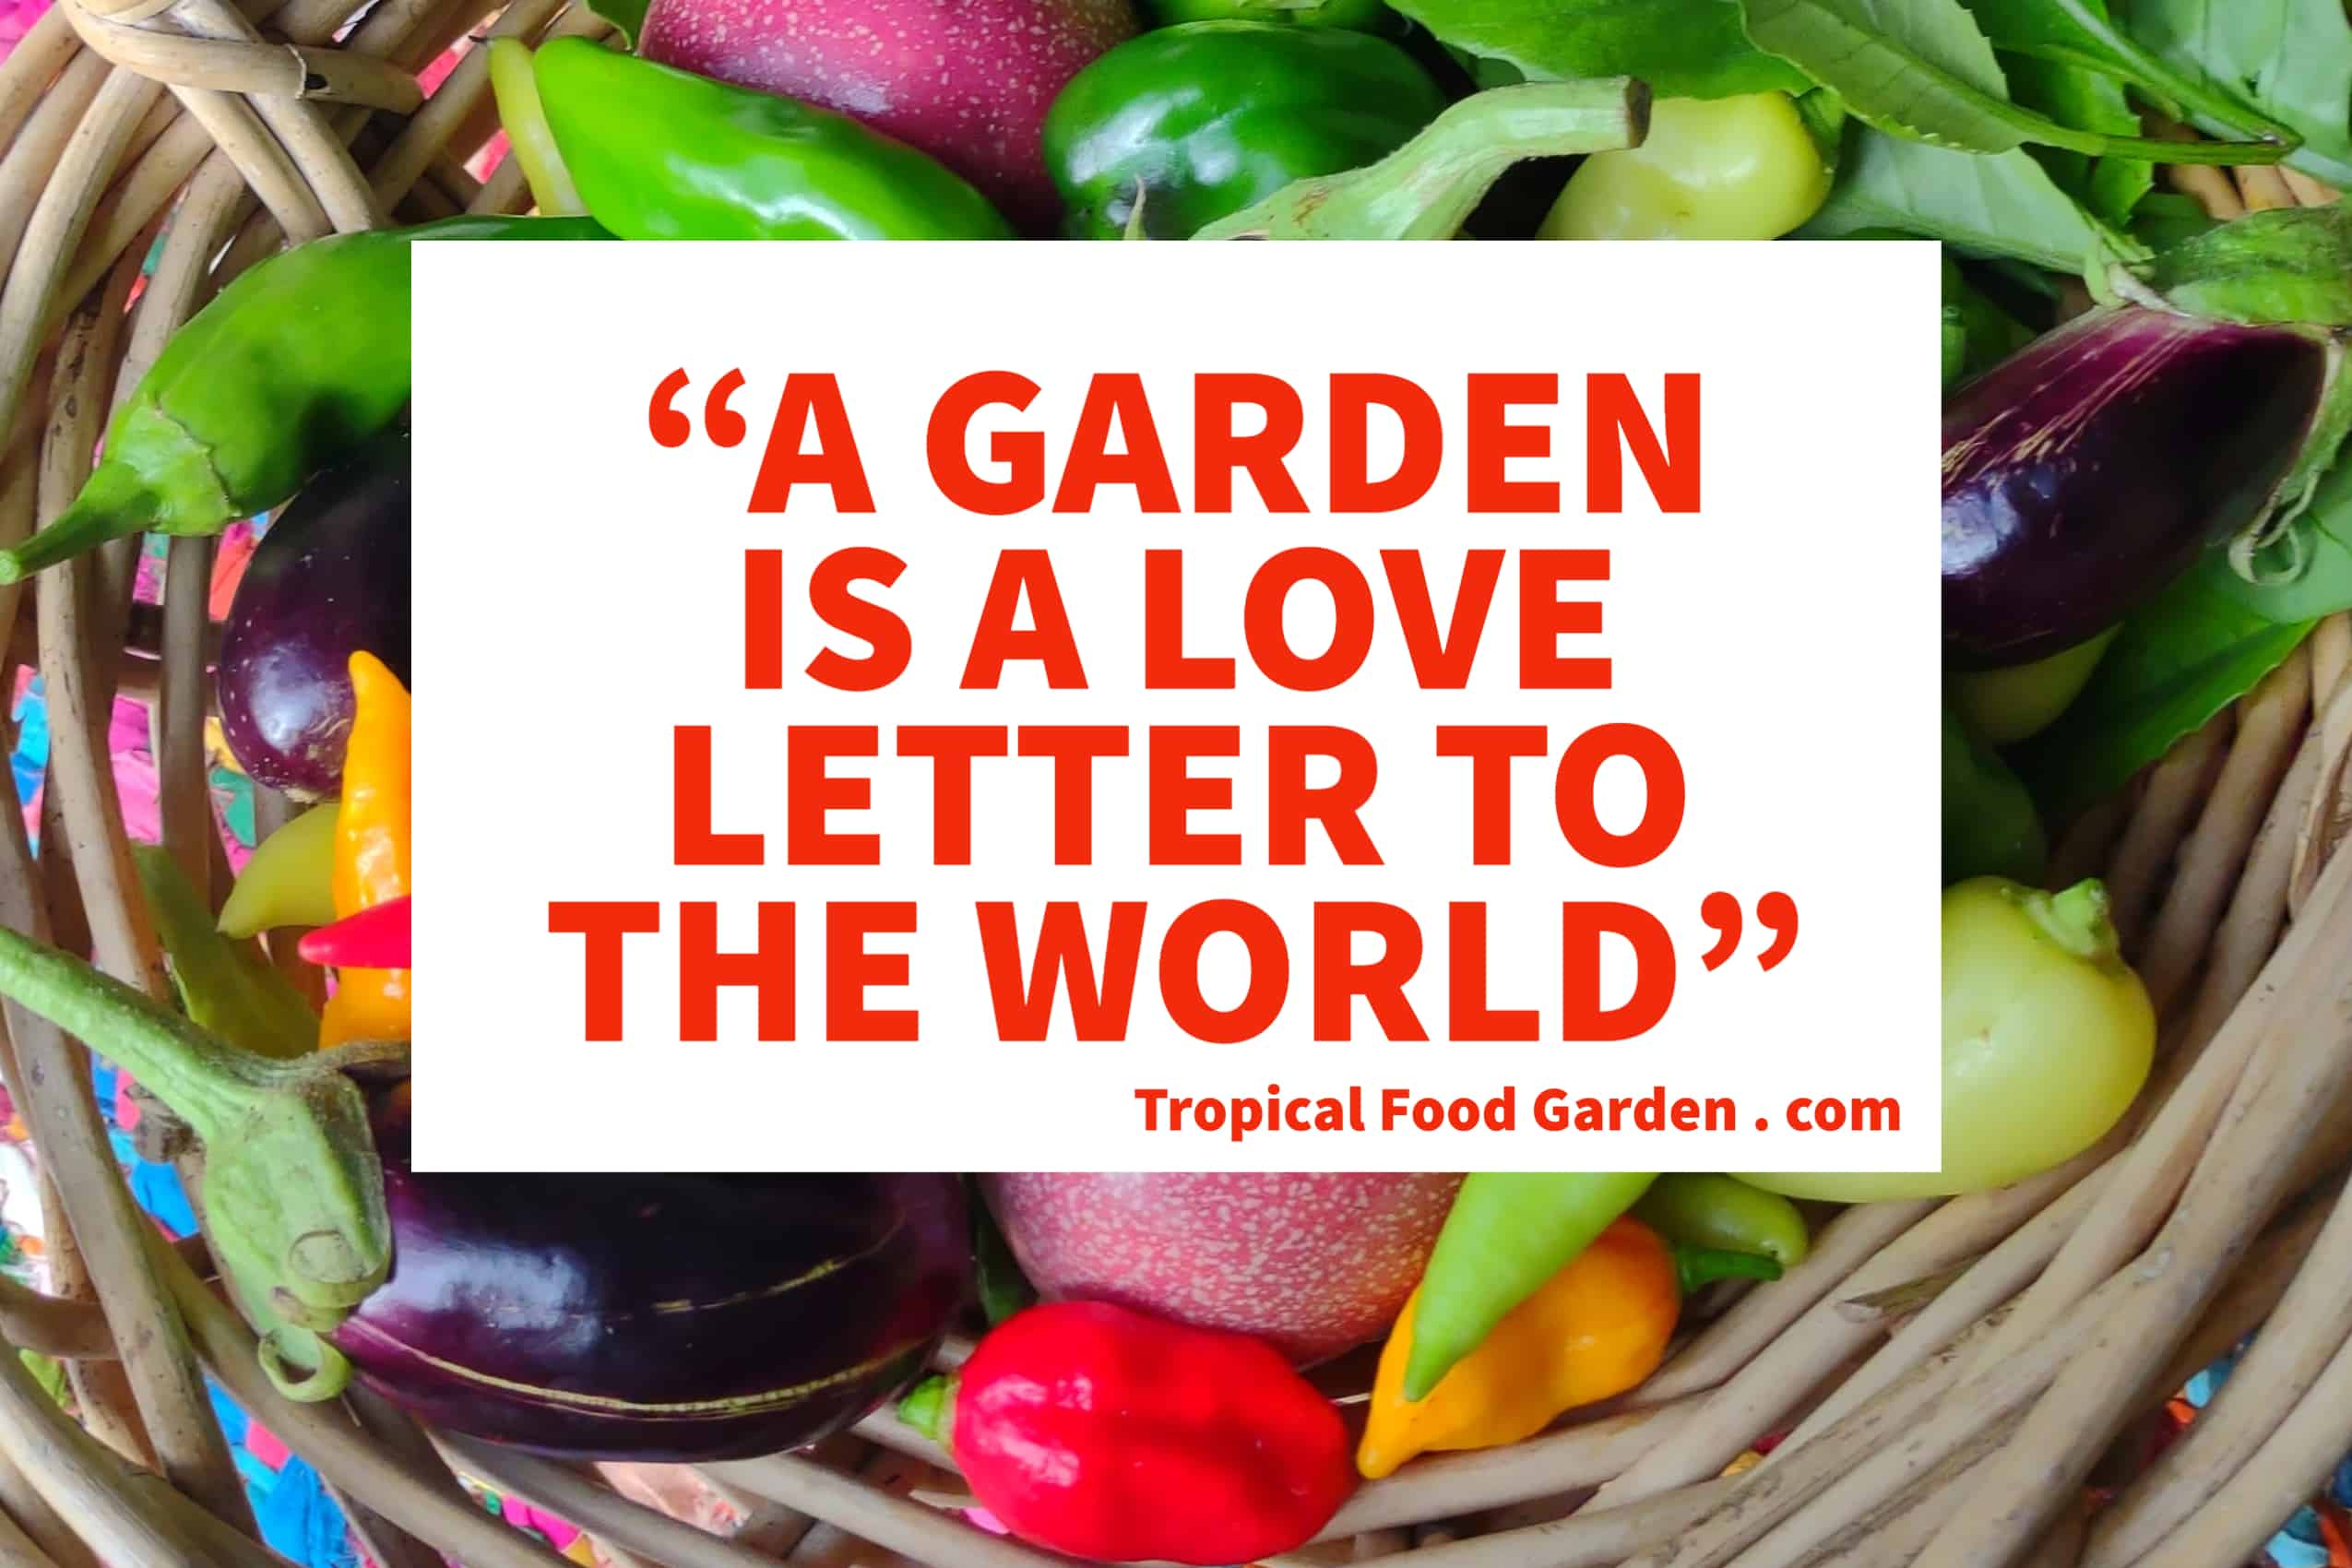 A garden is a love letter to the world quote by tropical food garden